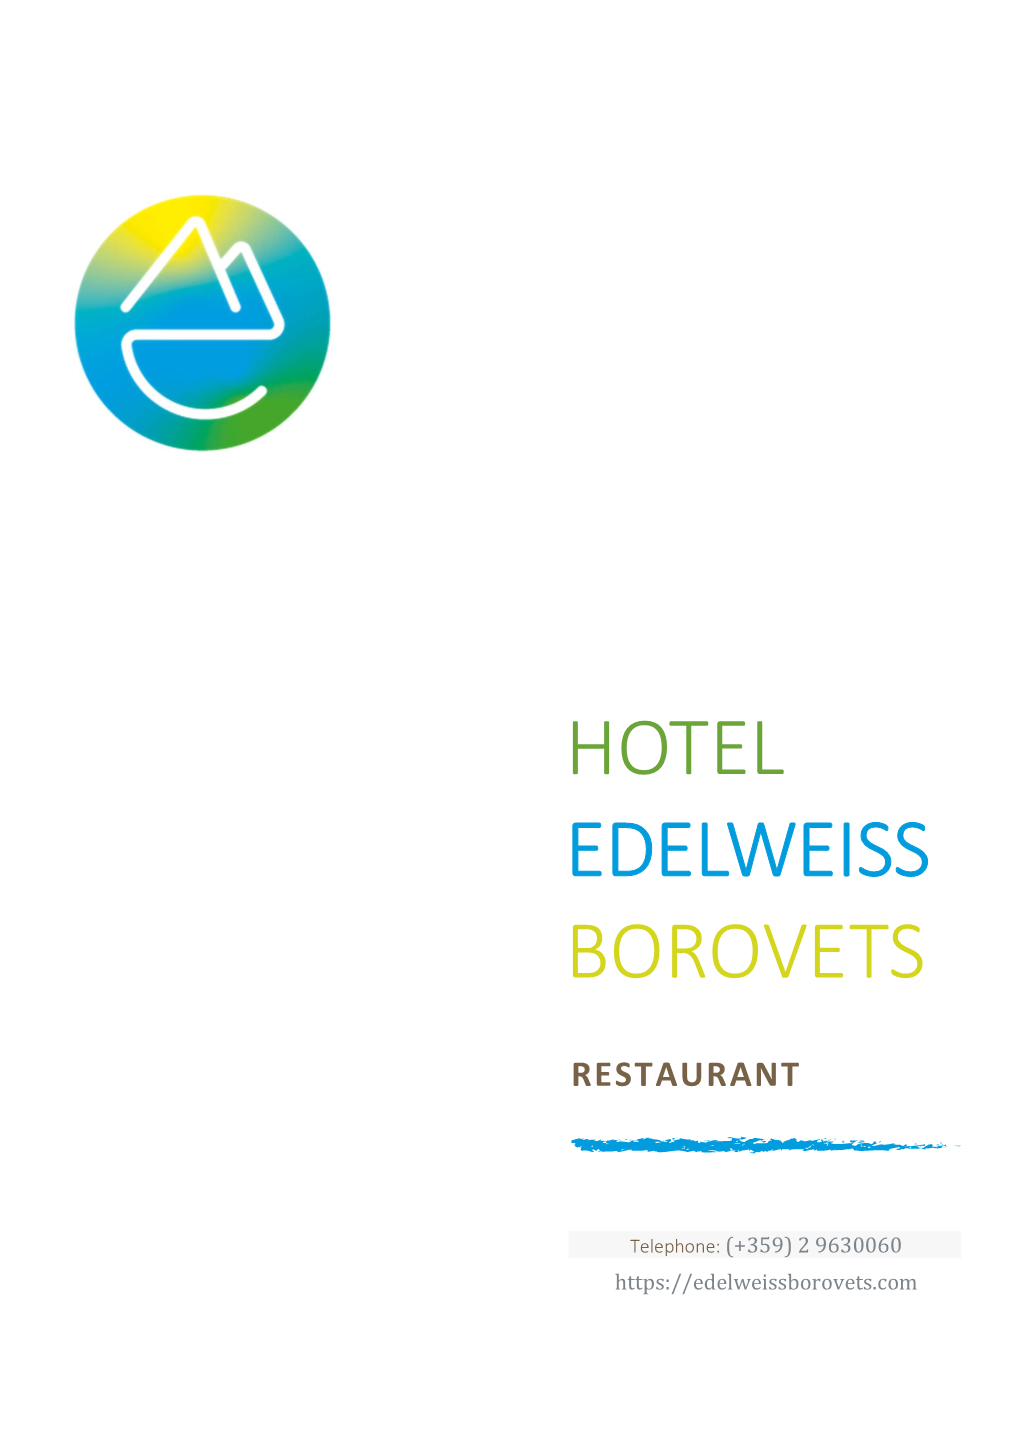 Hotel Edelweiss, Borovets